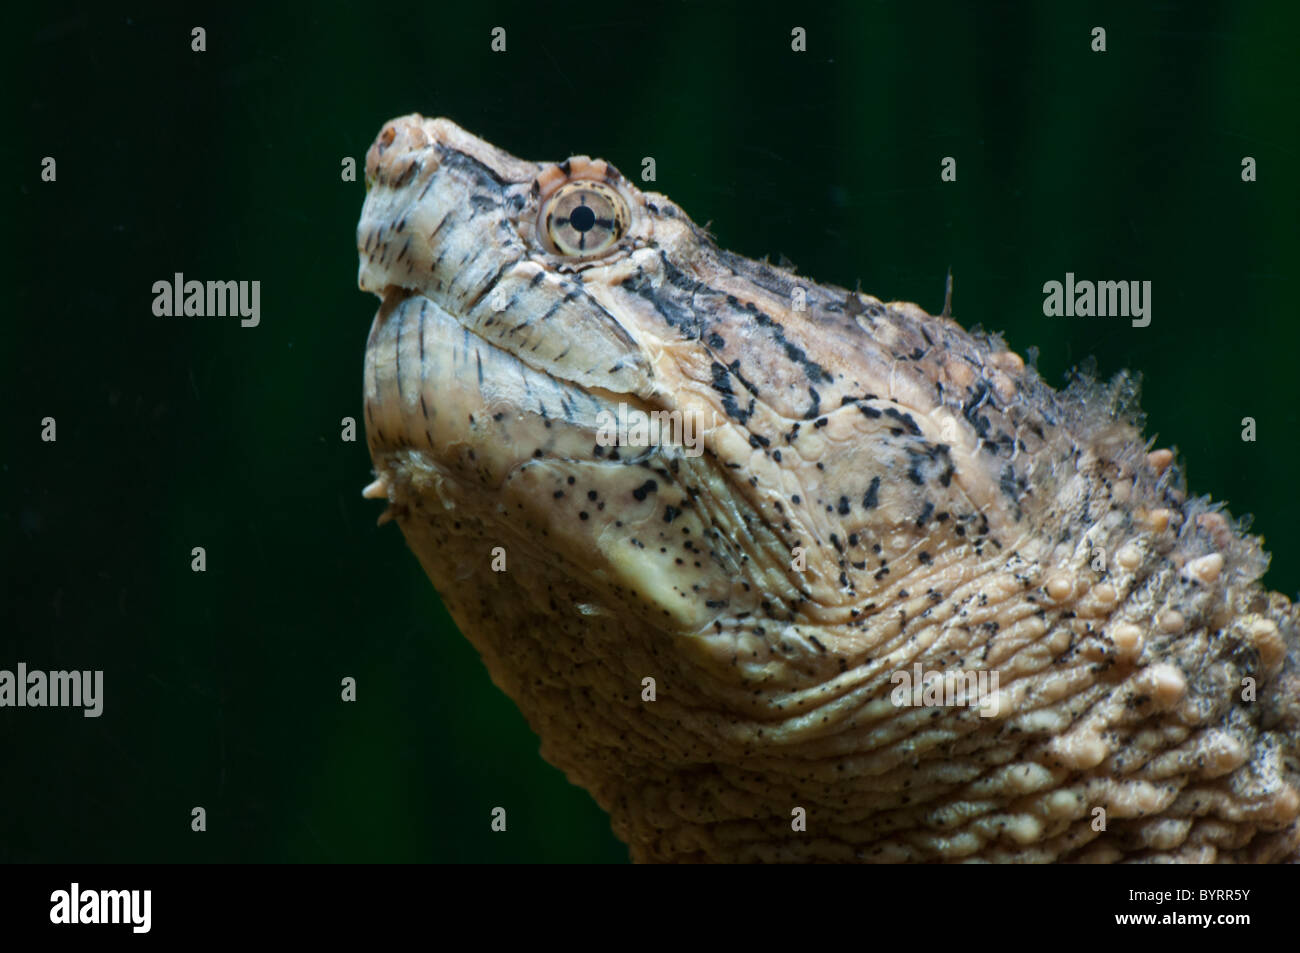 Close-up of a Common Snapping Turtle. Stock Photo